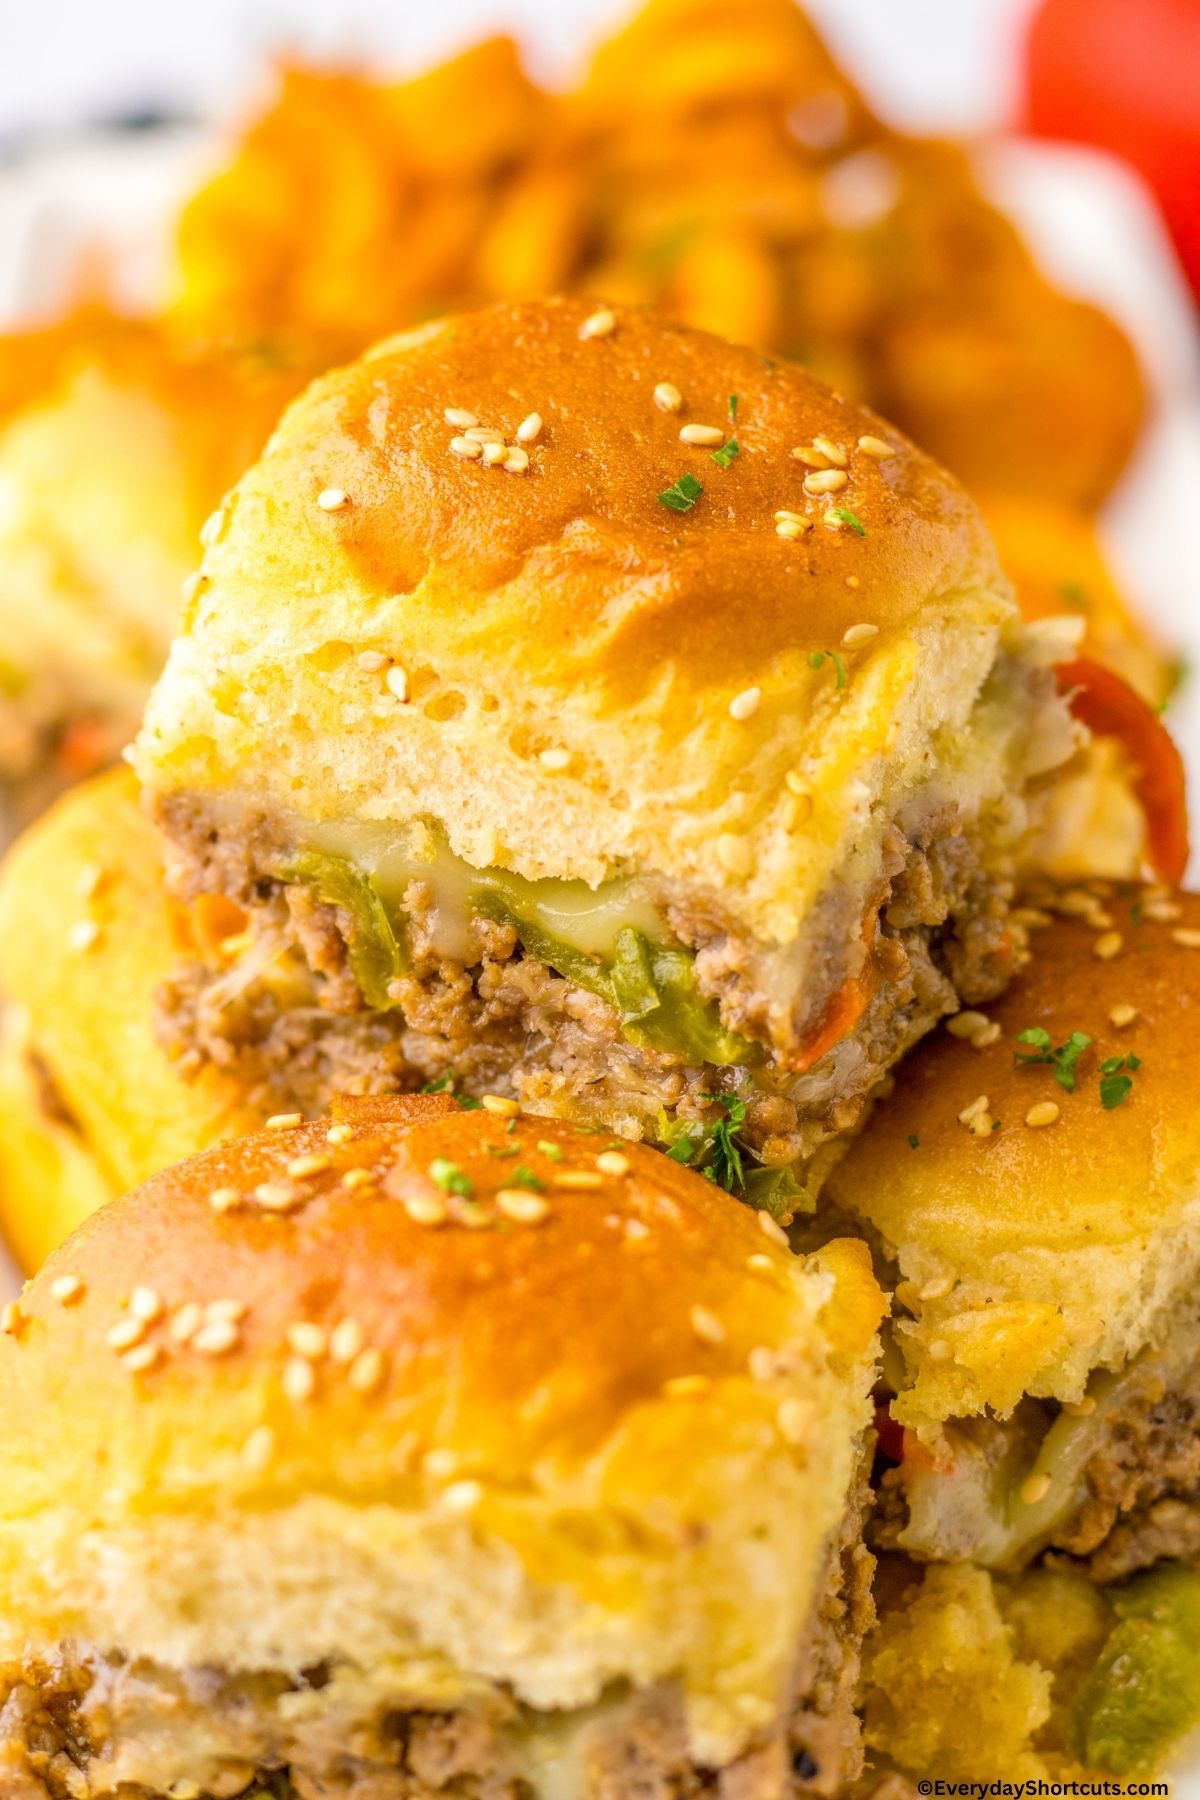 Philly cheesesteak sliders with ground beef